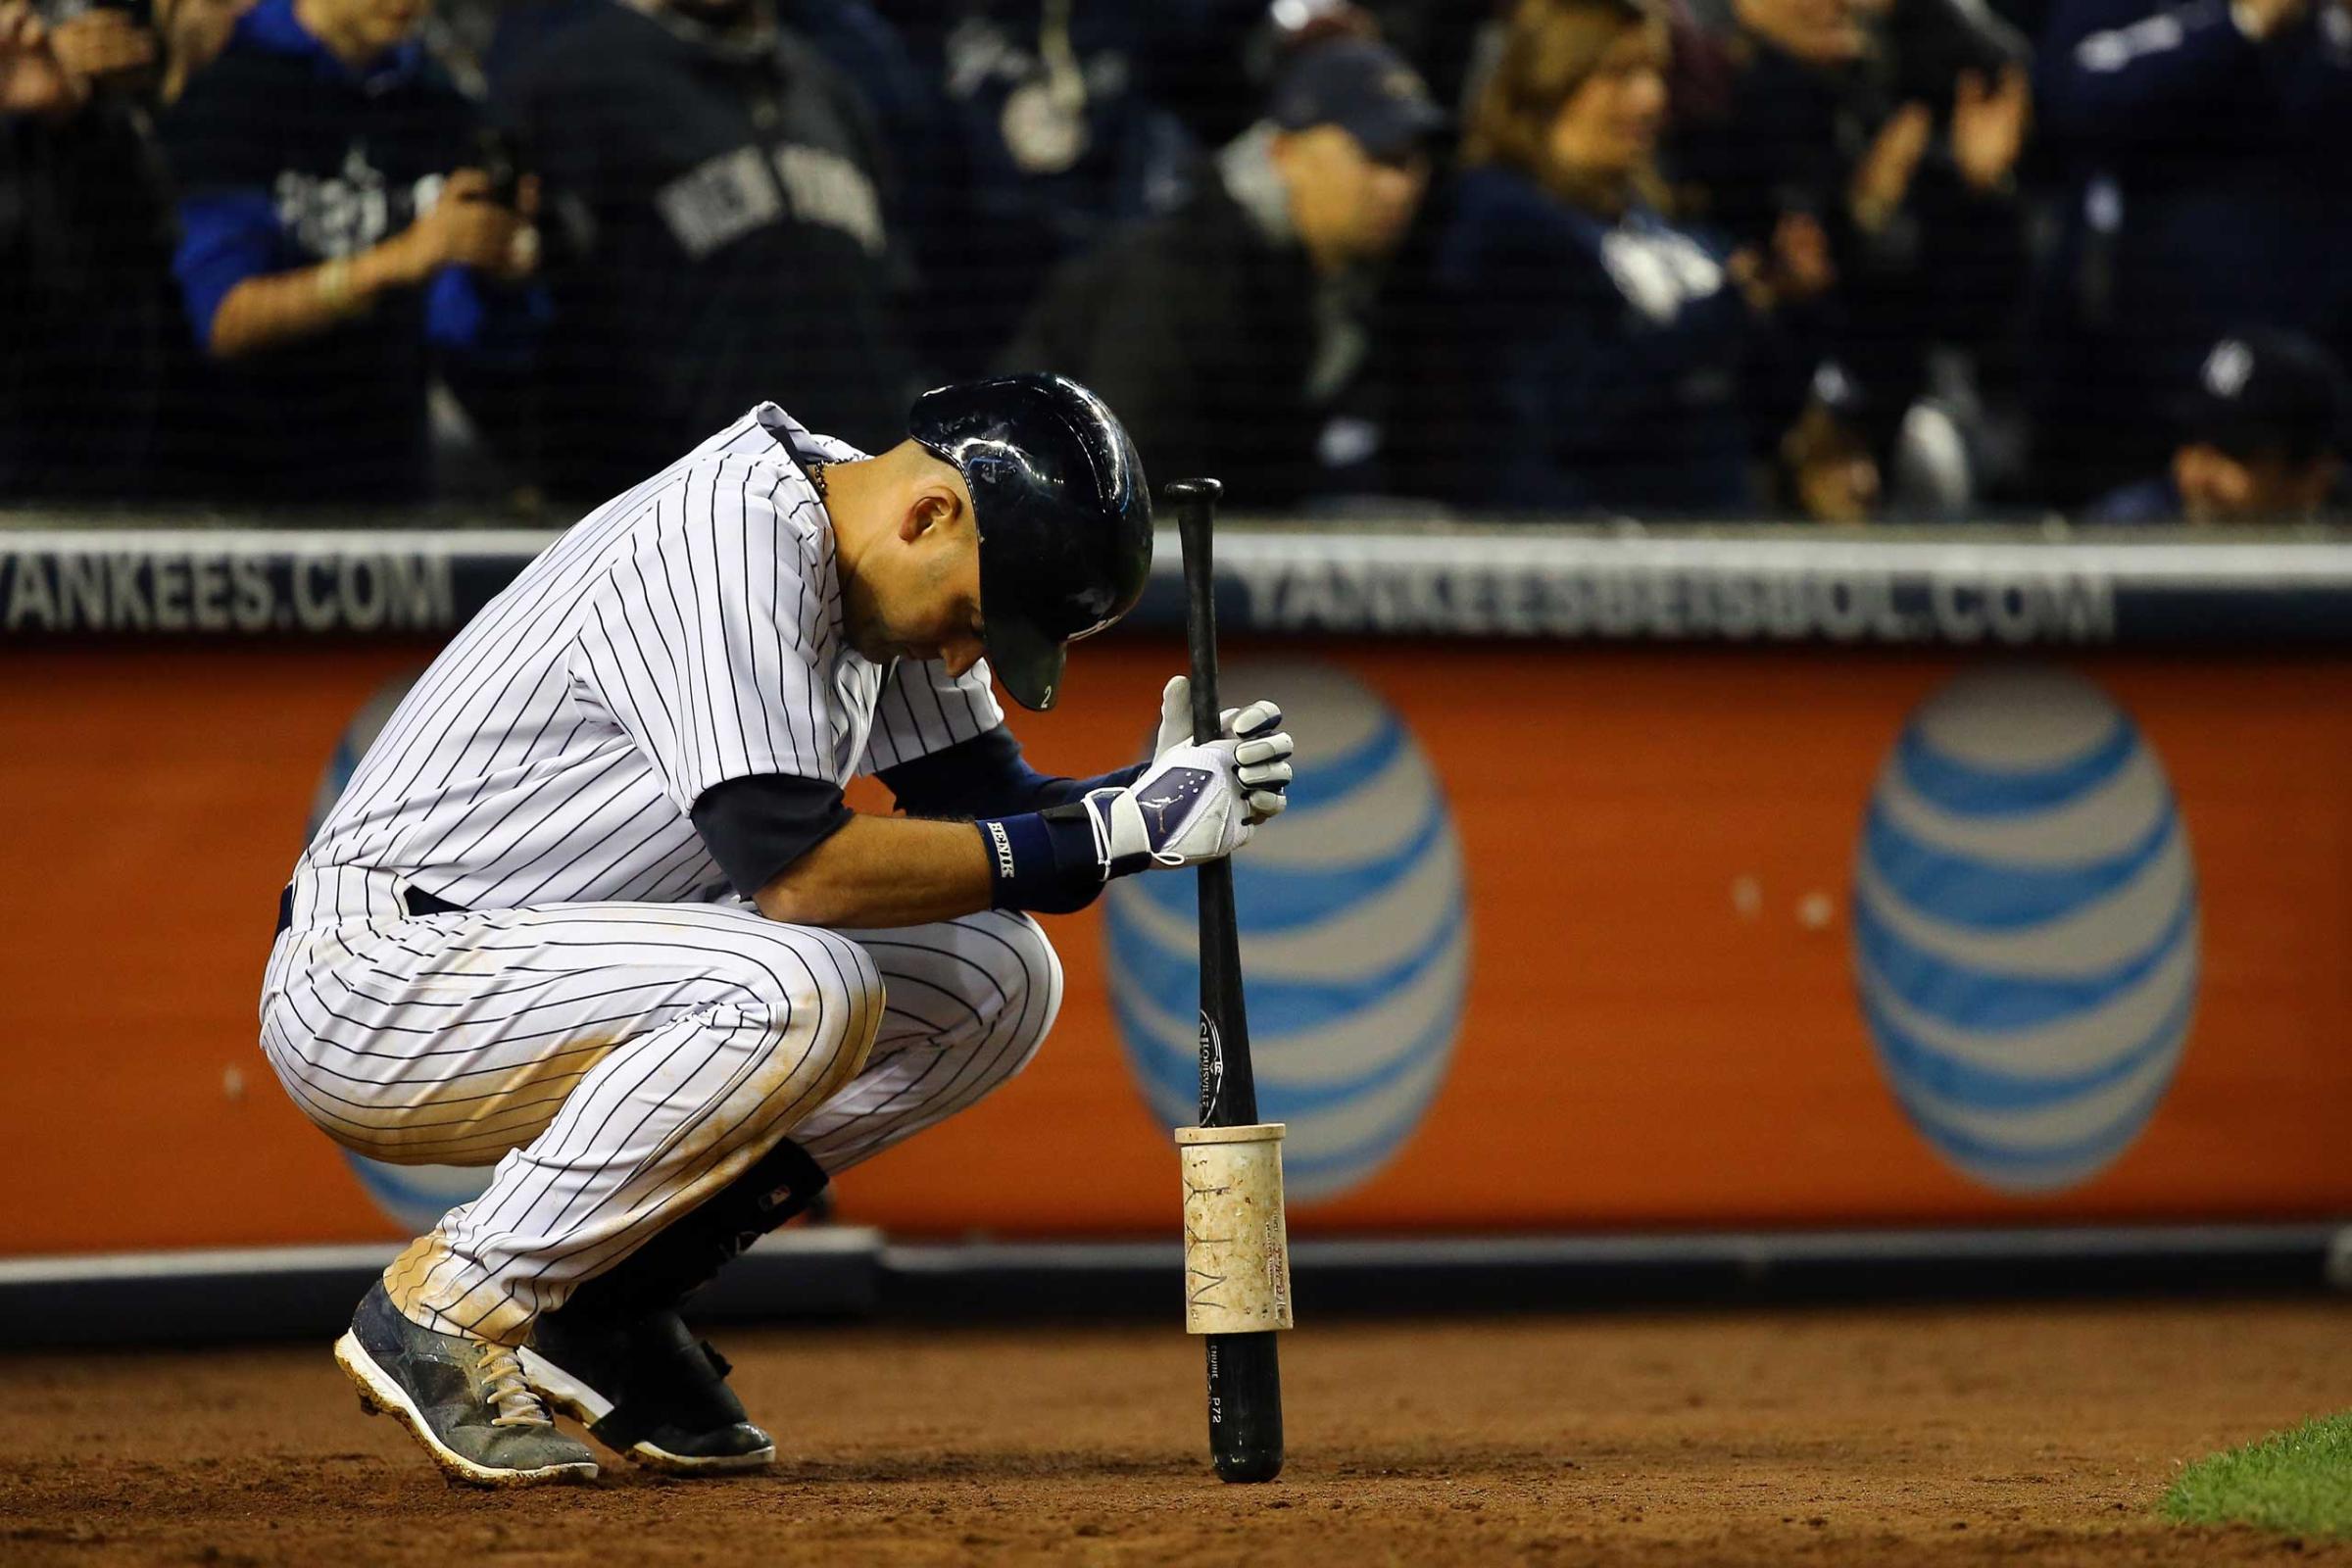 Derek Jeter looks on against the Baltimore Orioles during a game at Yankee Stadium on Sept. 25, 2014.